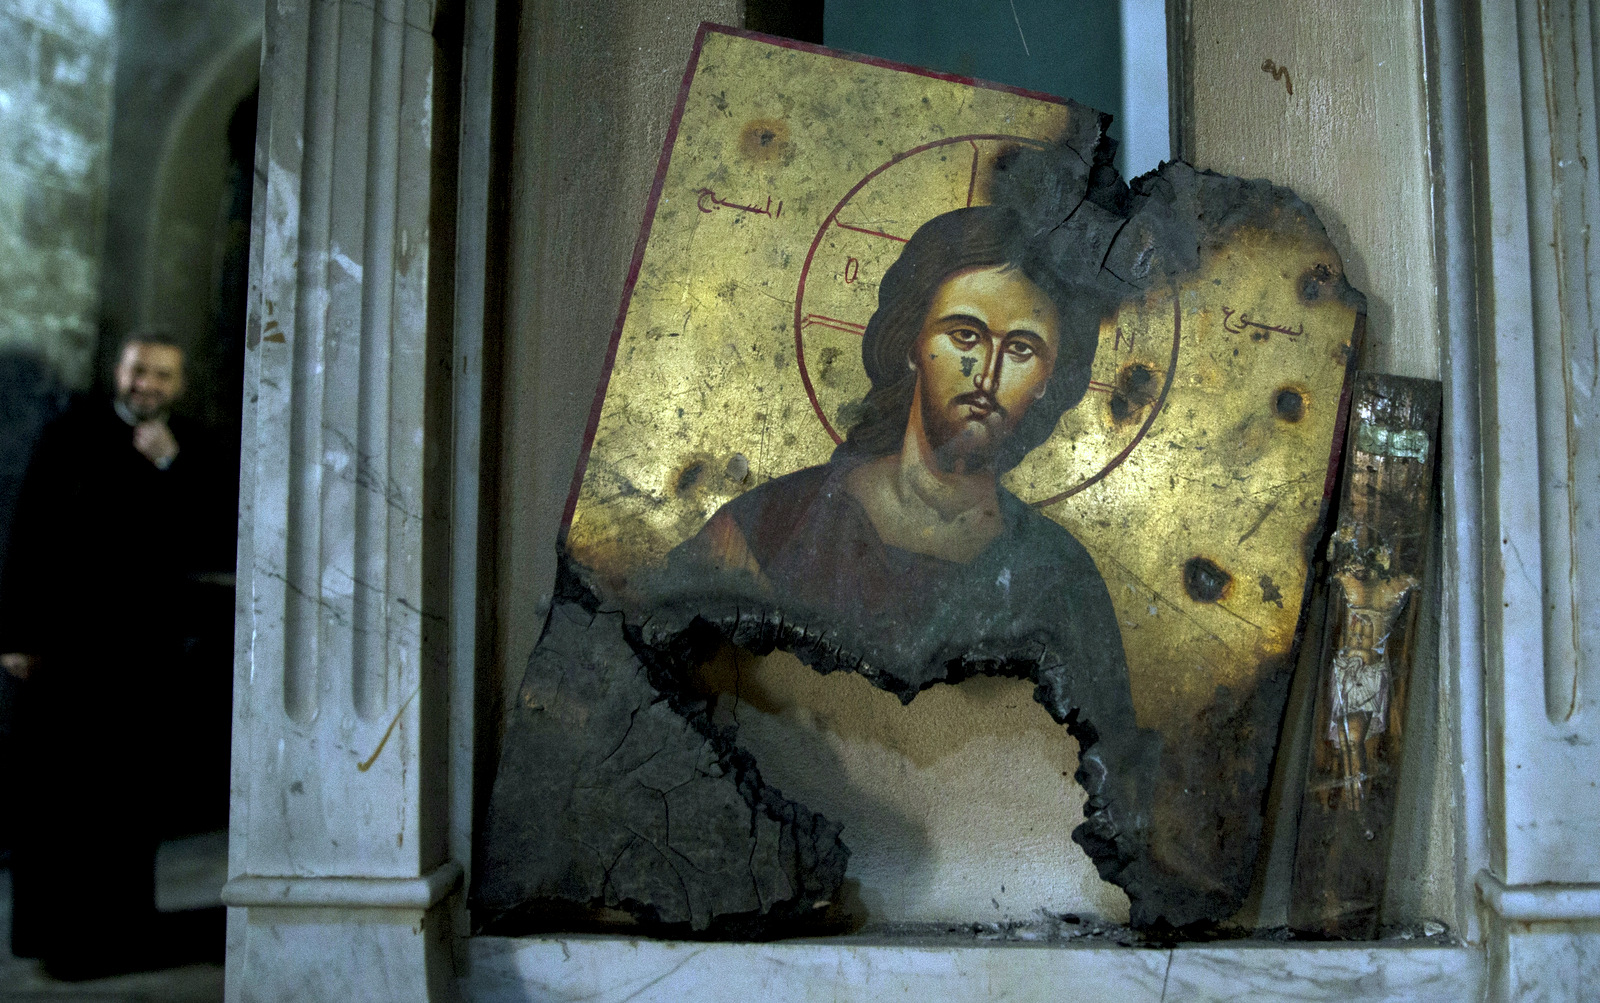 A half-burned image of Christ is placed next to a wall at a Greek Orthodox church in Maaloula, Syria, March 3, 2016. Maaloula, an ancient Christian town 40 miles northeast of Damascus, changed hands several times in the war. Its historic churches pillaged by Syrian rebels and buildings riddled with shrapnel reflect fierce fighting that devastated the town two years ago. (AP/Pavel Golovkin)